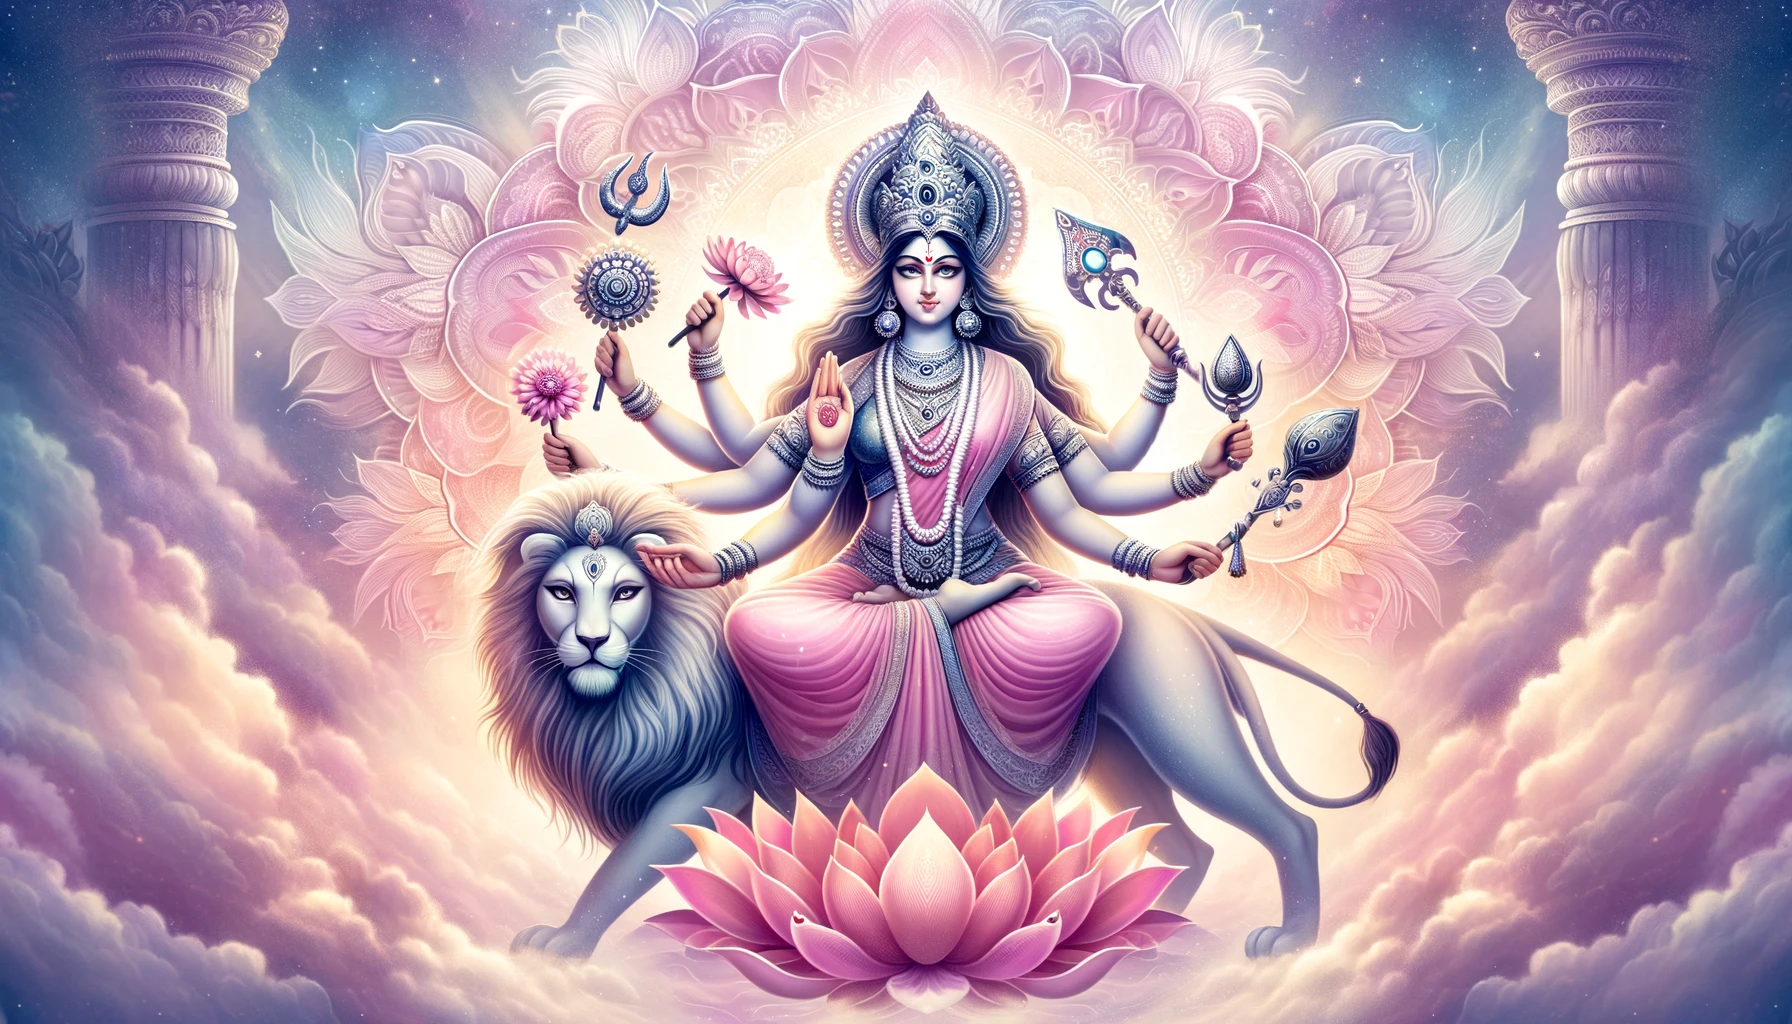 A majestic and inspiring illustration of Goddess Siddhidatri, the ninth form of Goddess Durga worshipped on the last day of Navratri. The image should